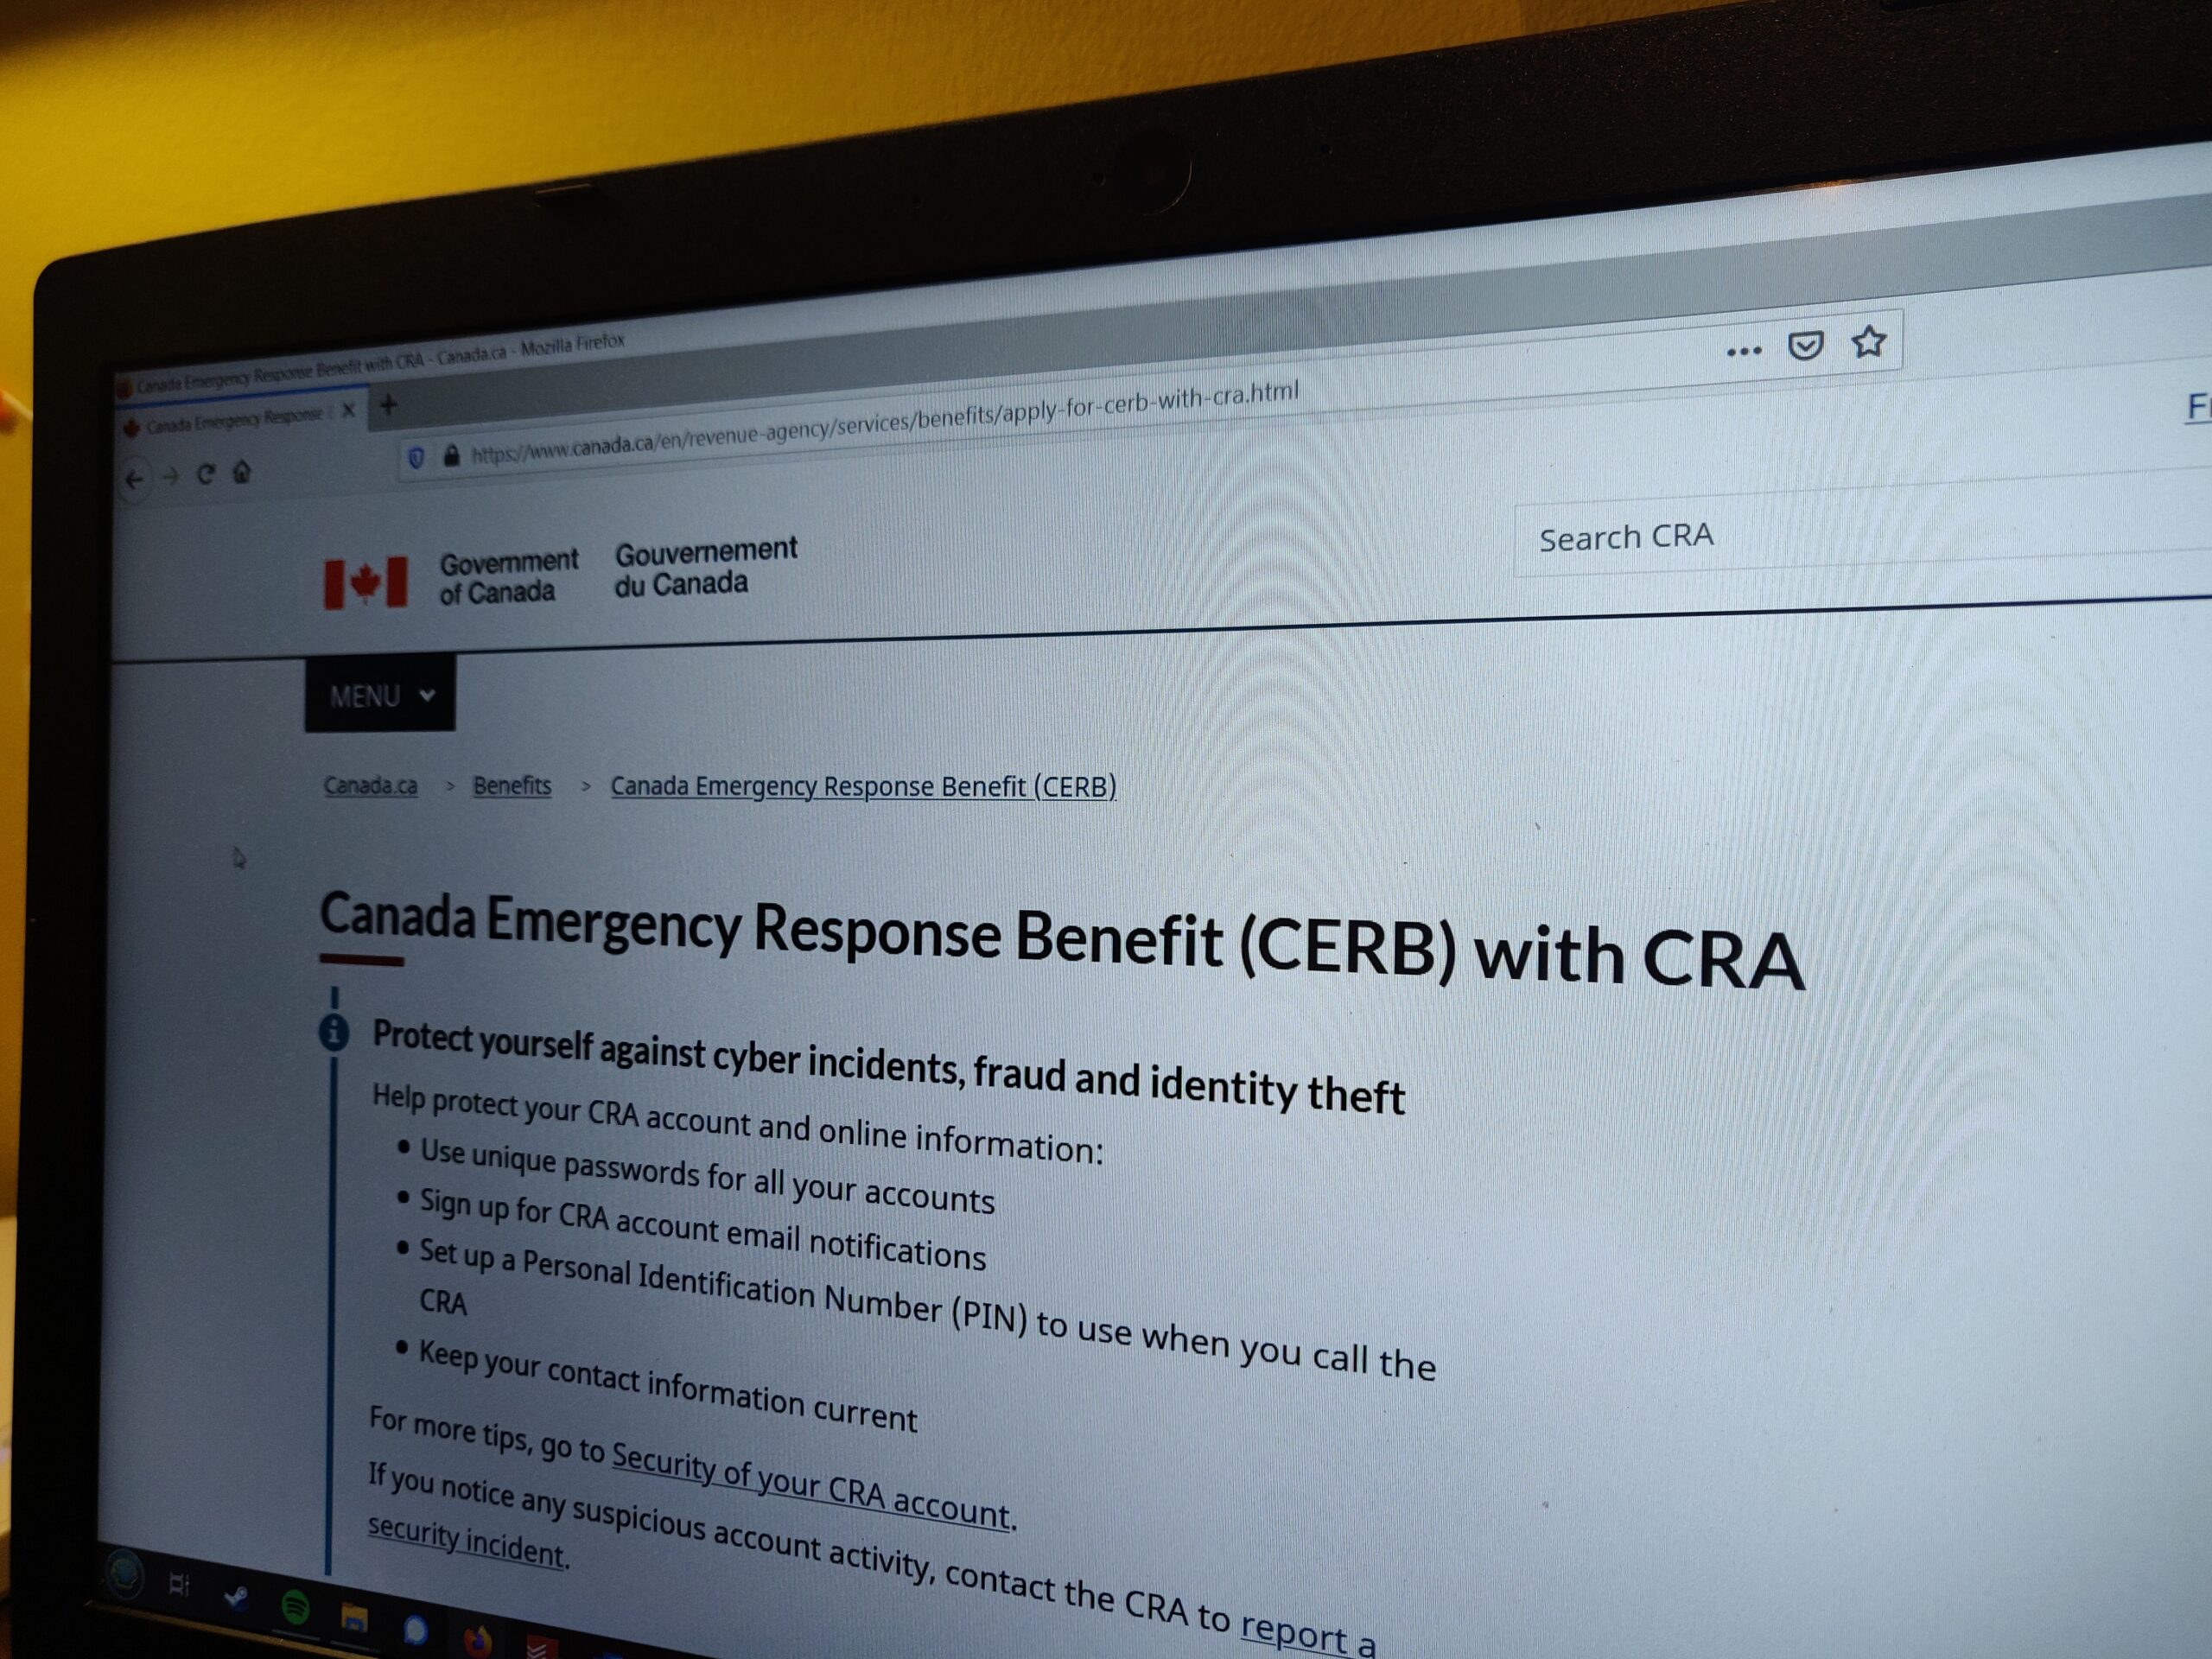 The landing page for the Canada Emergency Response Benefit is seen on Thursday, September 17, 2020. (Humber News/File Photo)